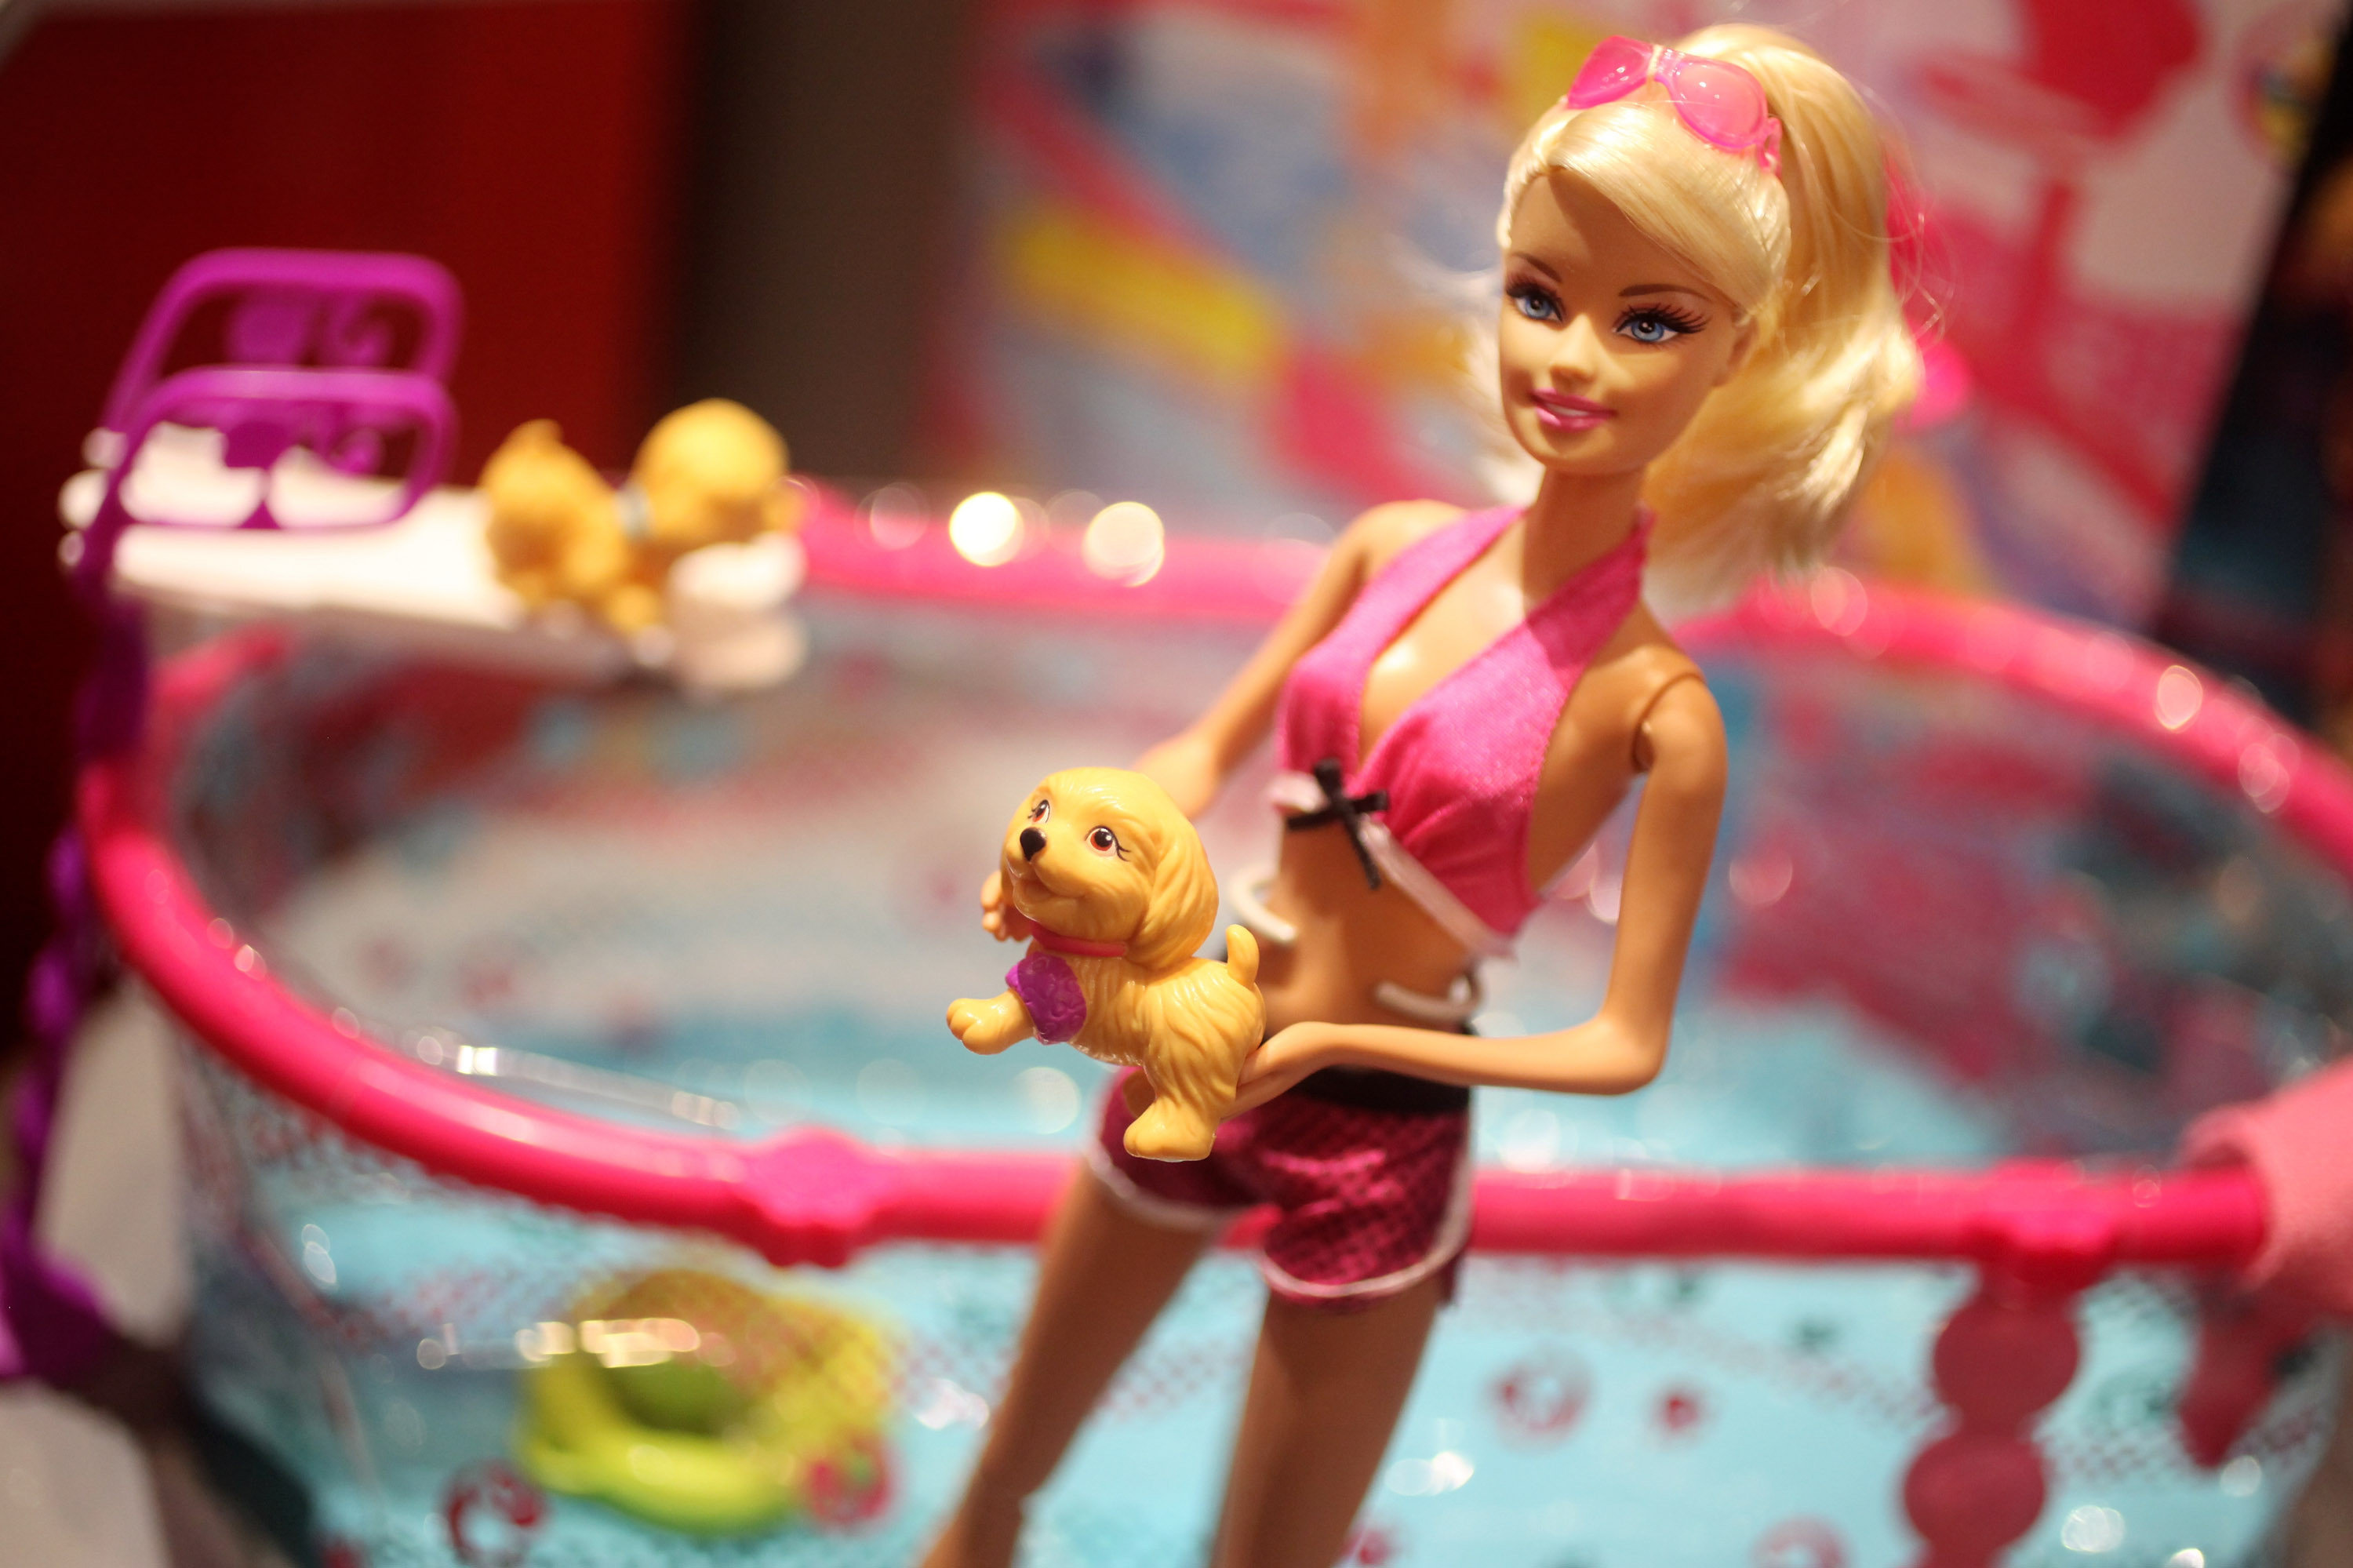 Barbie Doll Packaging Comes From Indonesia Rainforests: Greenpeace 